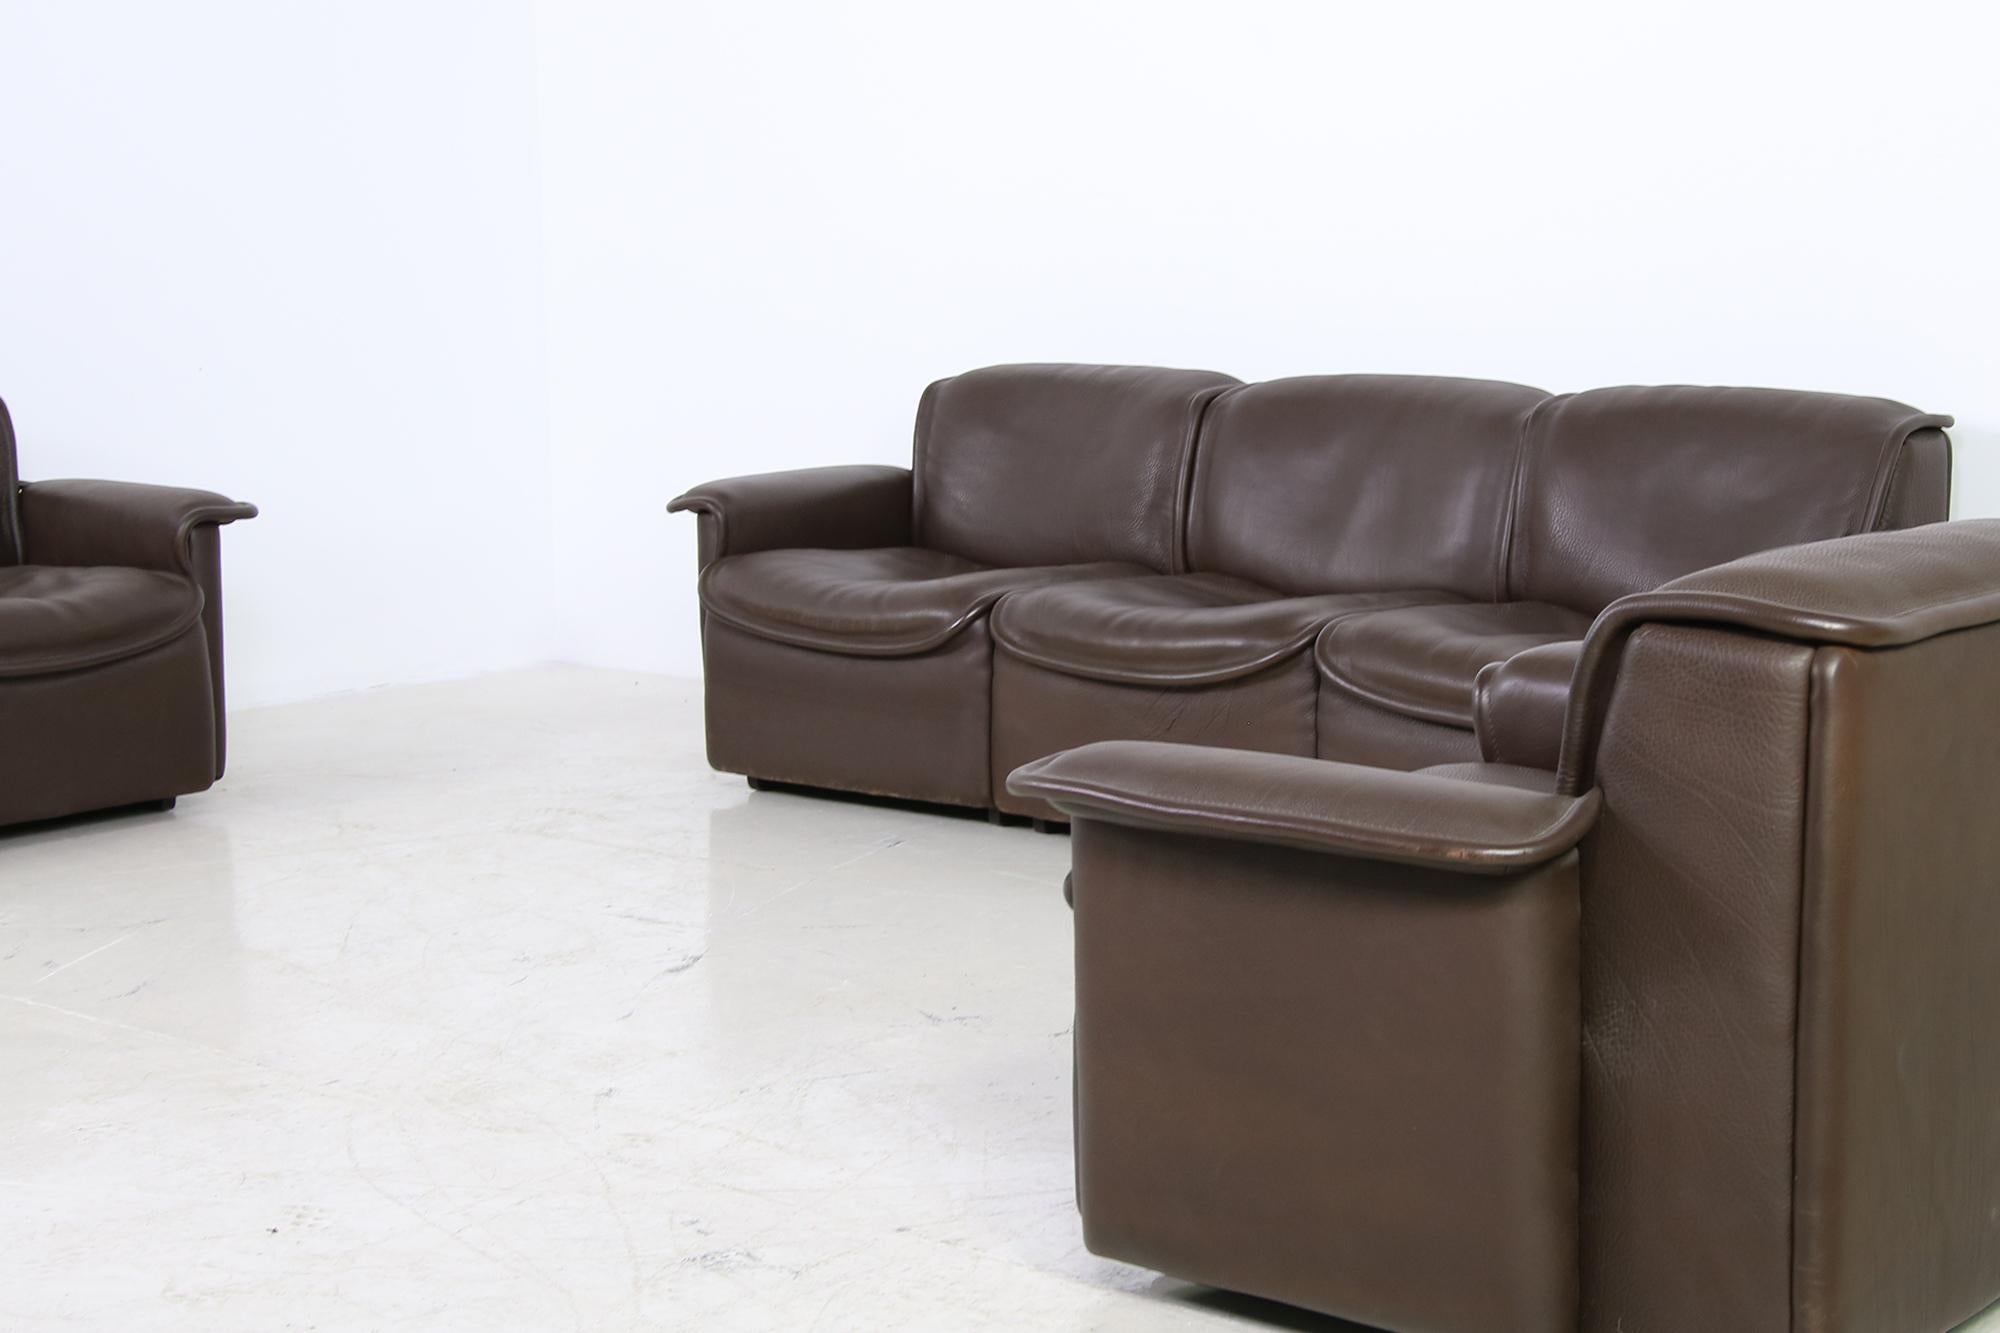 Modern Vintage 1970s Modular De Sede DS 12 Brown Leather Sofa Set & Chair Seating Group